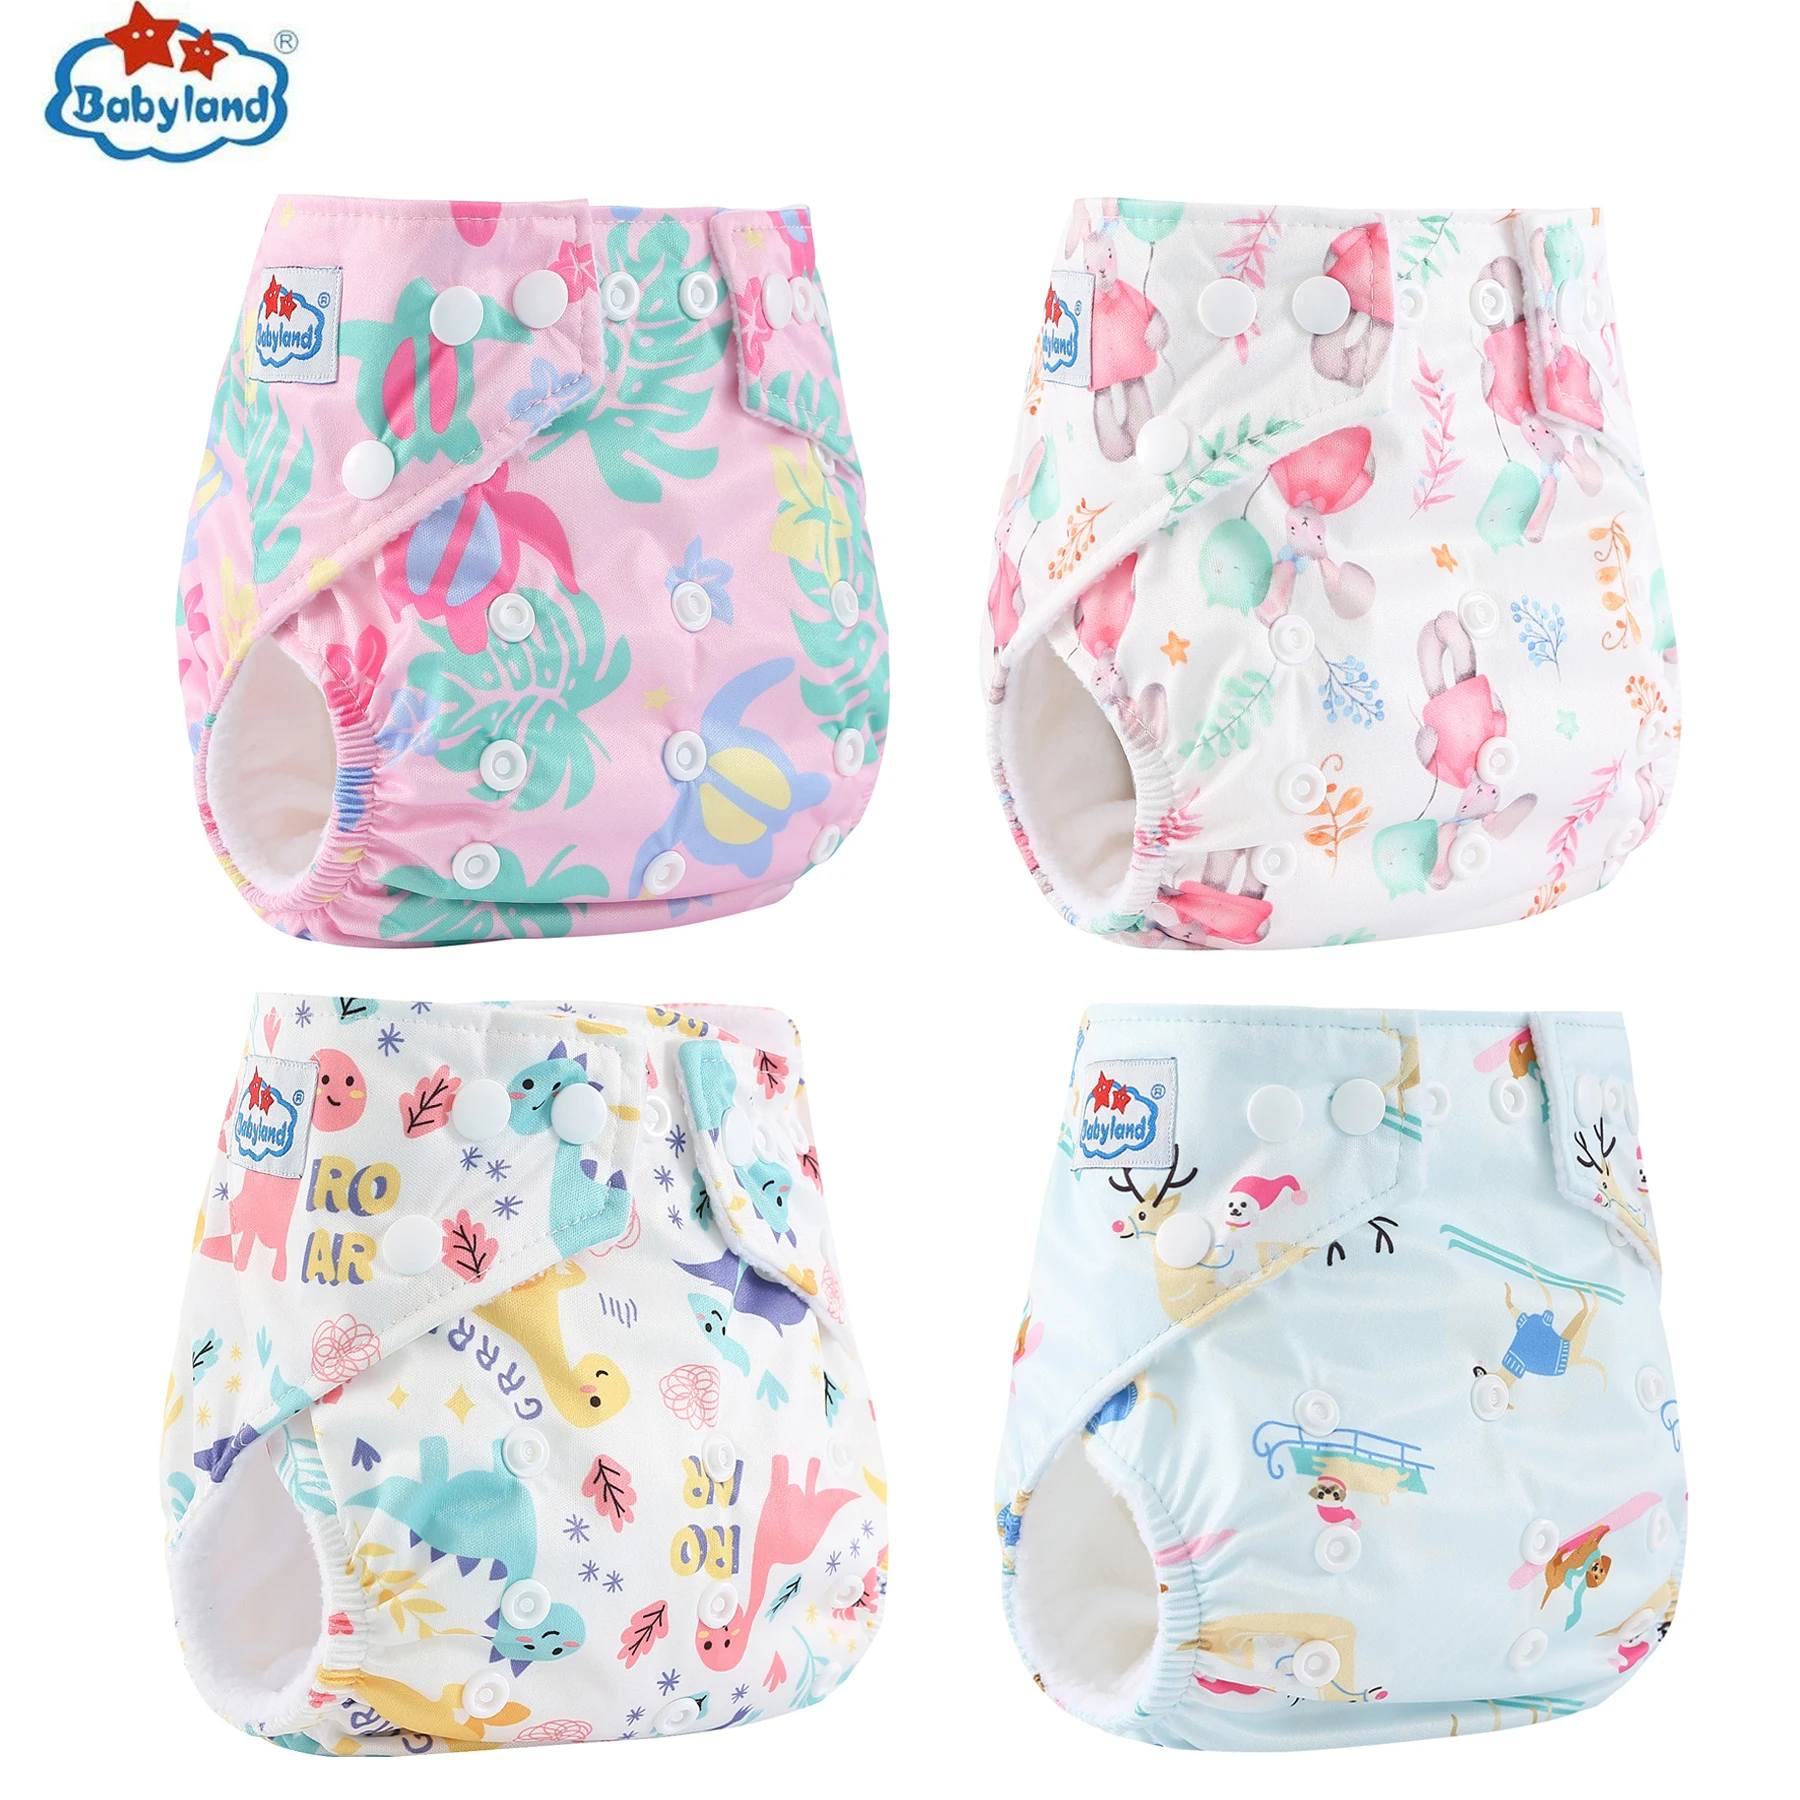 Babyland 4pcs/set Cloth Diapers Baby Shells Adjustable Reusable Baby Cloth Nappy Pocket Diaper Covers For Baby 3-15KG